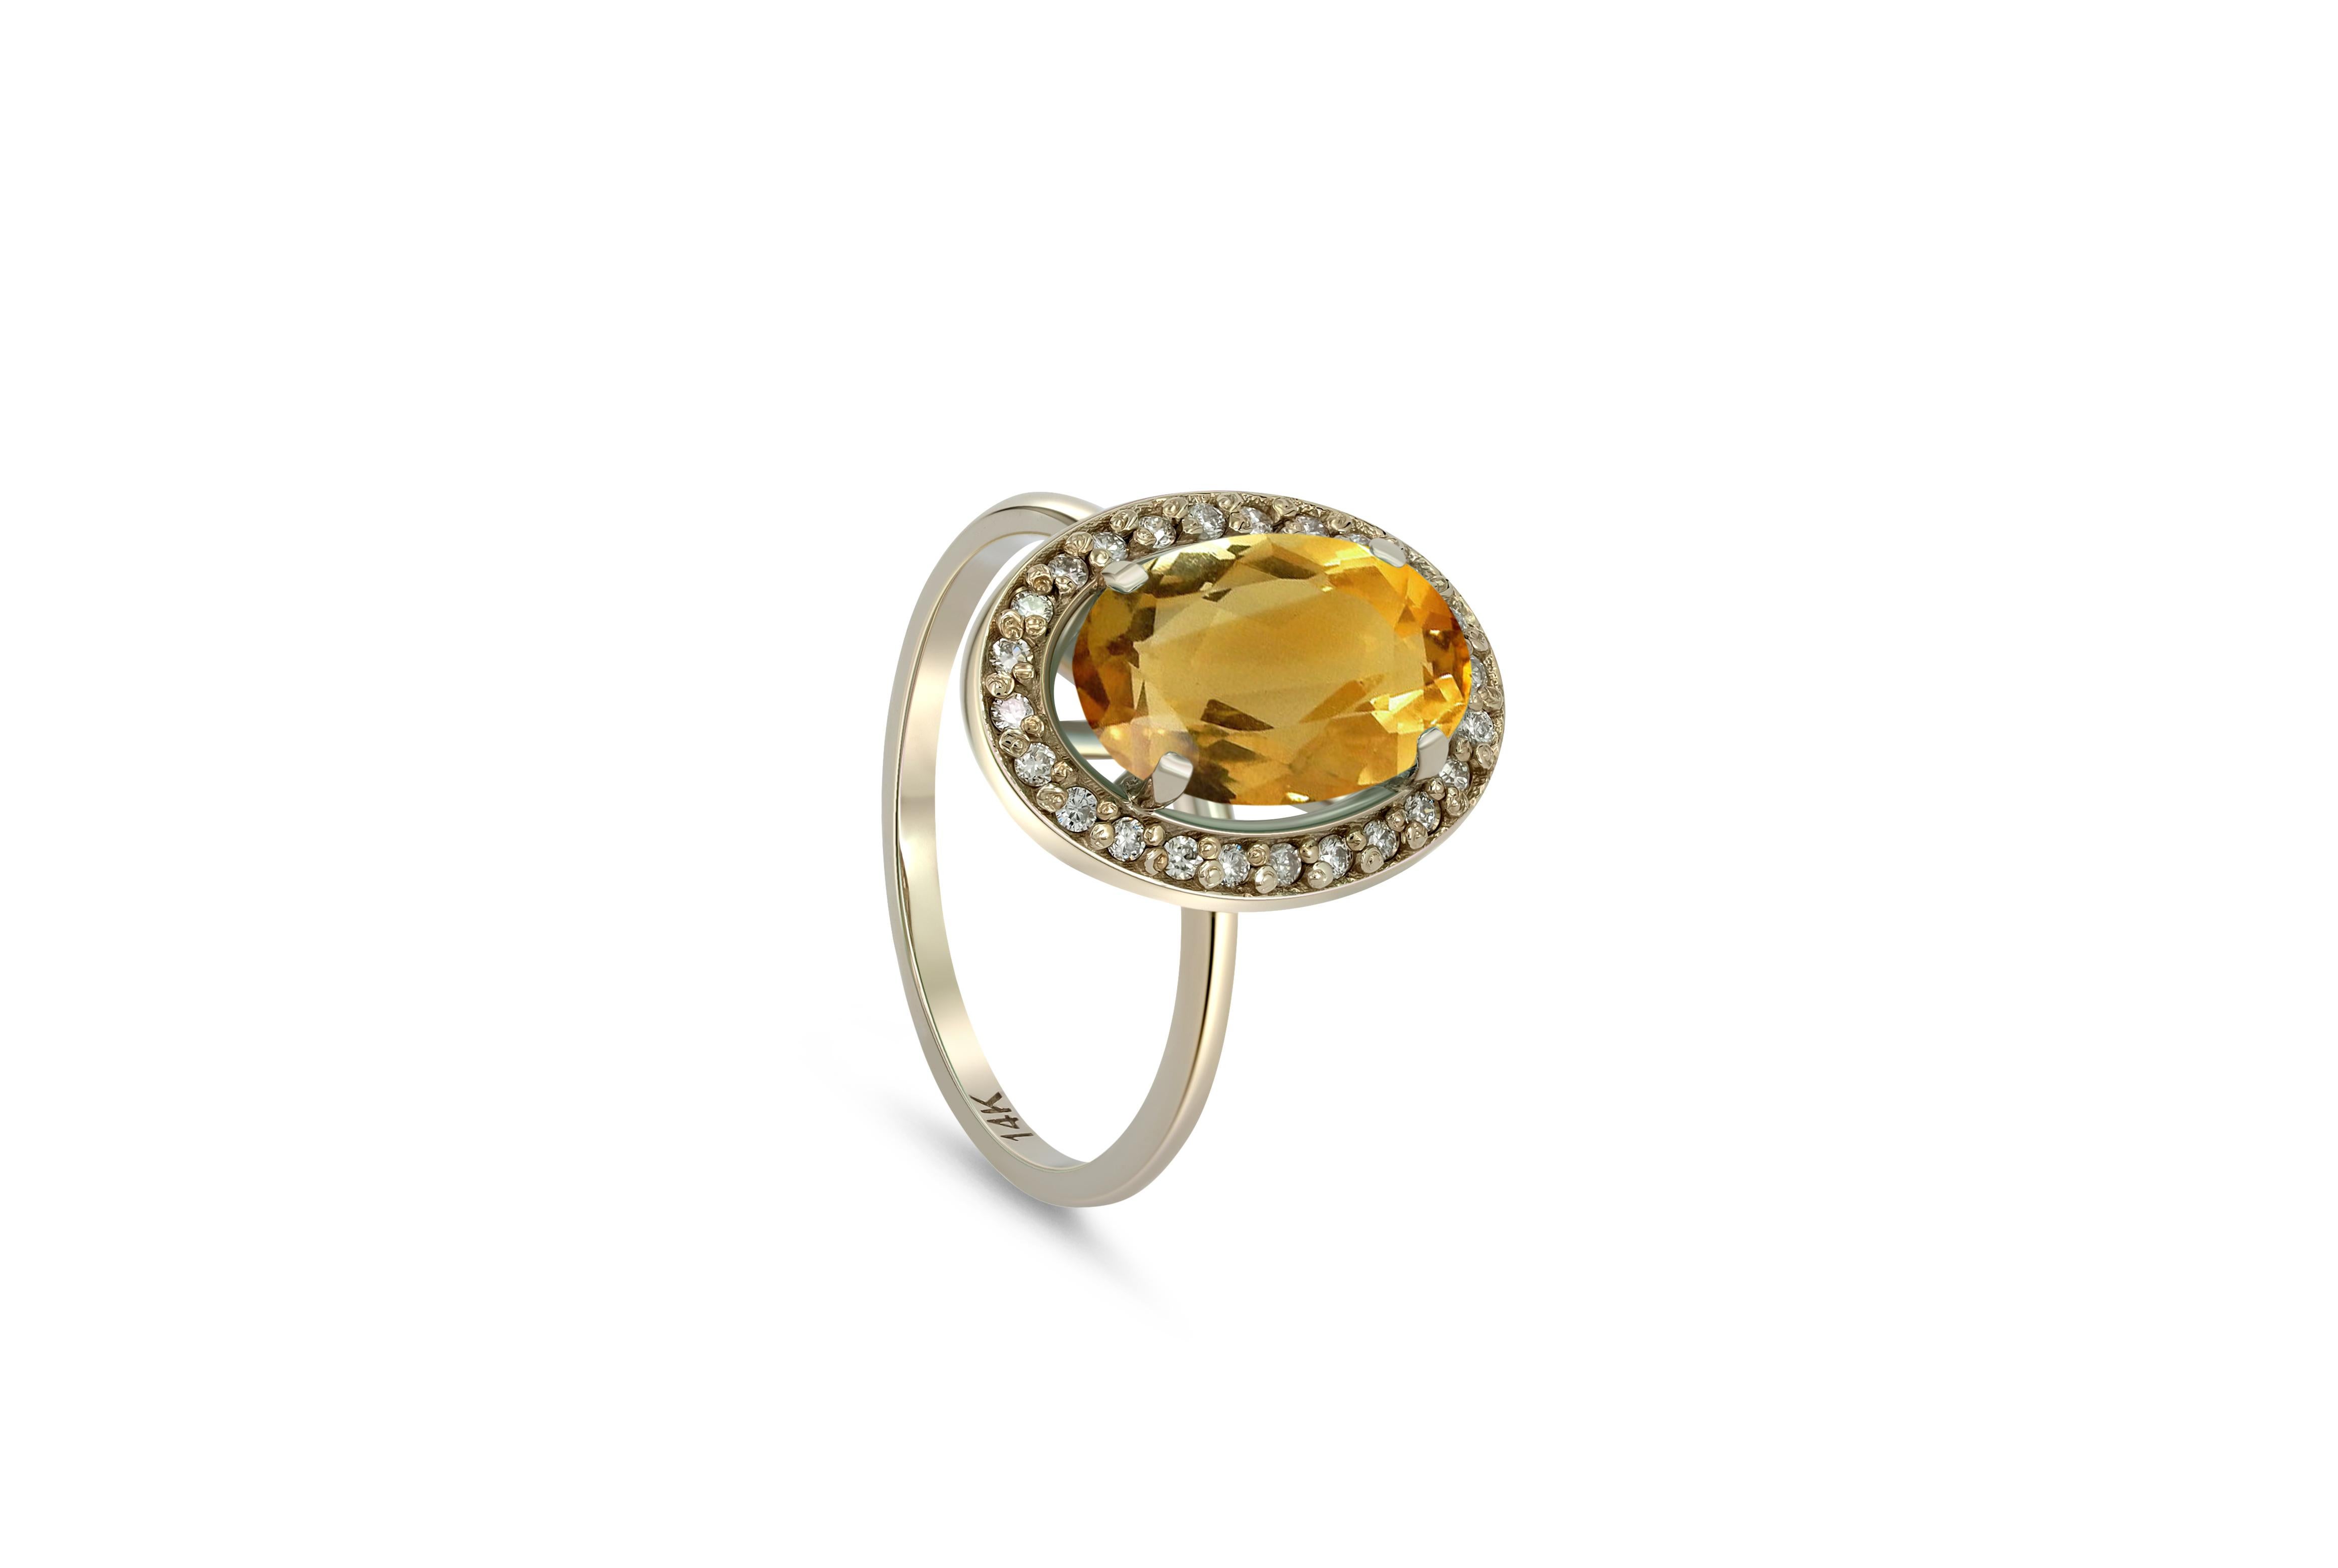 Citrine and diamonds 14k gold ring. 
Oval Citrine gold ring. Citrine diamond halo ring. Yellow gemstone ring.

Metal: 14k gold
Weight: 3 gr depends from size

Gemstones:
Citrine - 1 piece
Cut - oval
Color - yellow
Weight - 3-3.2 ct

Side gemstones -